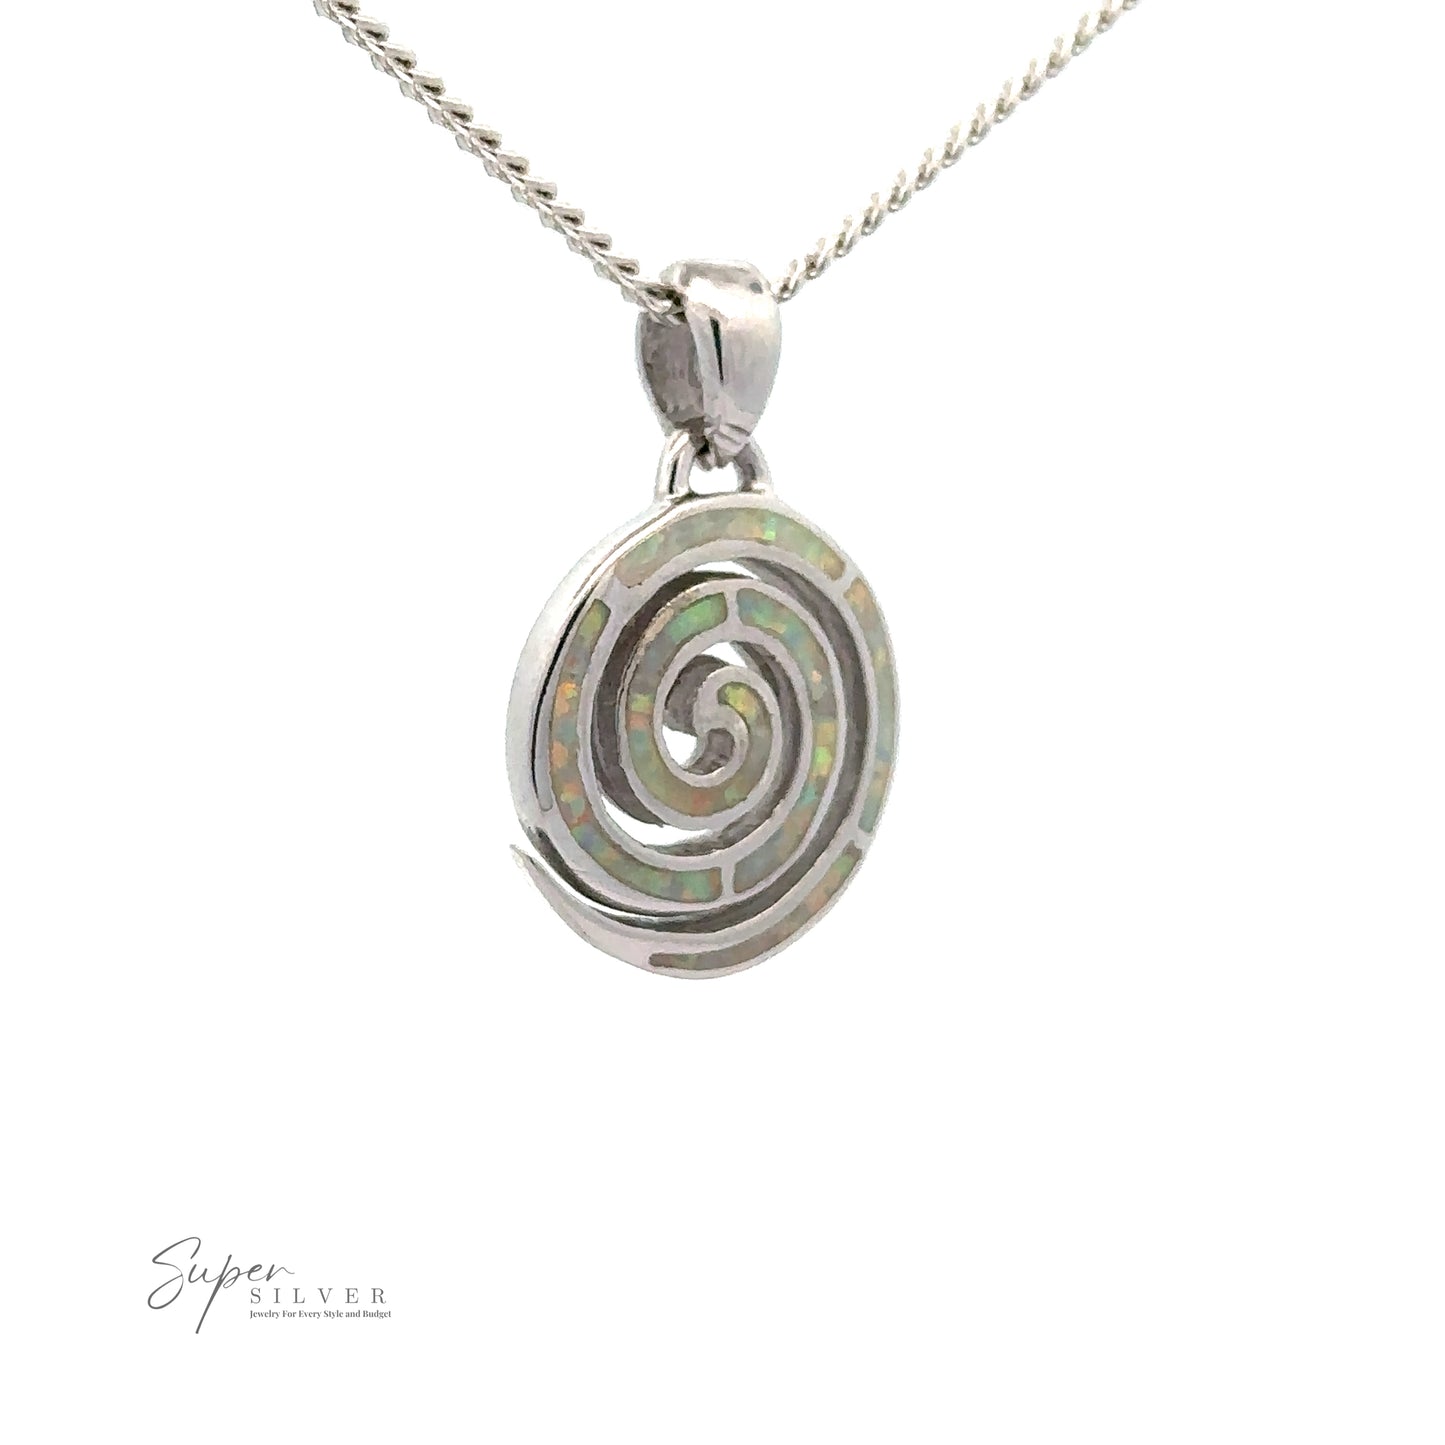 
                  
                    Opal Spiral Pendant with a spiral-shaped pendant featuring intricate inlay patterns and an opal stone centerpiece. The pendant, enhanced with a rhodium finish, hangs from a twisted chain. Logo text "Super Silver" is visible at the bottom left.
                  
                